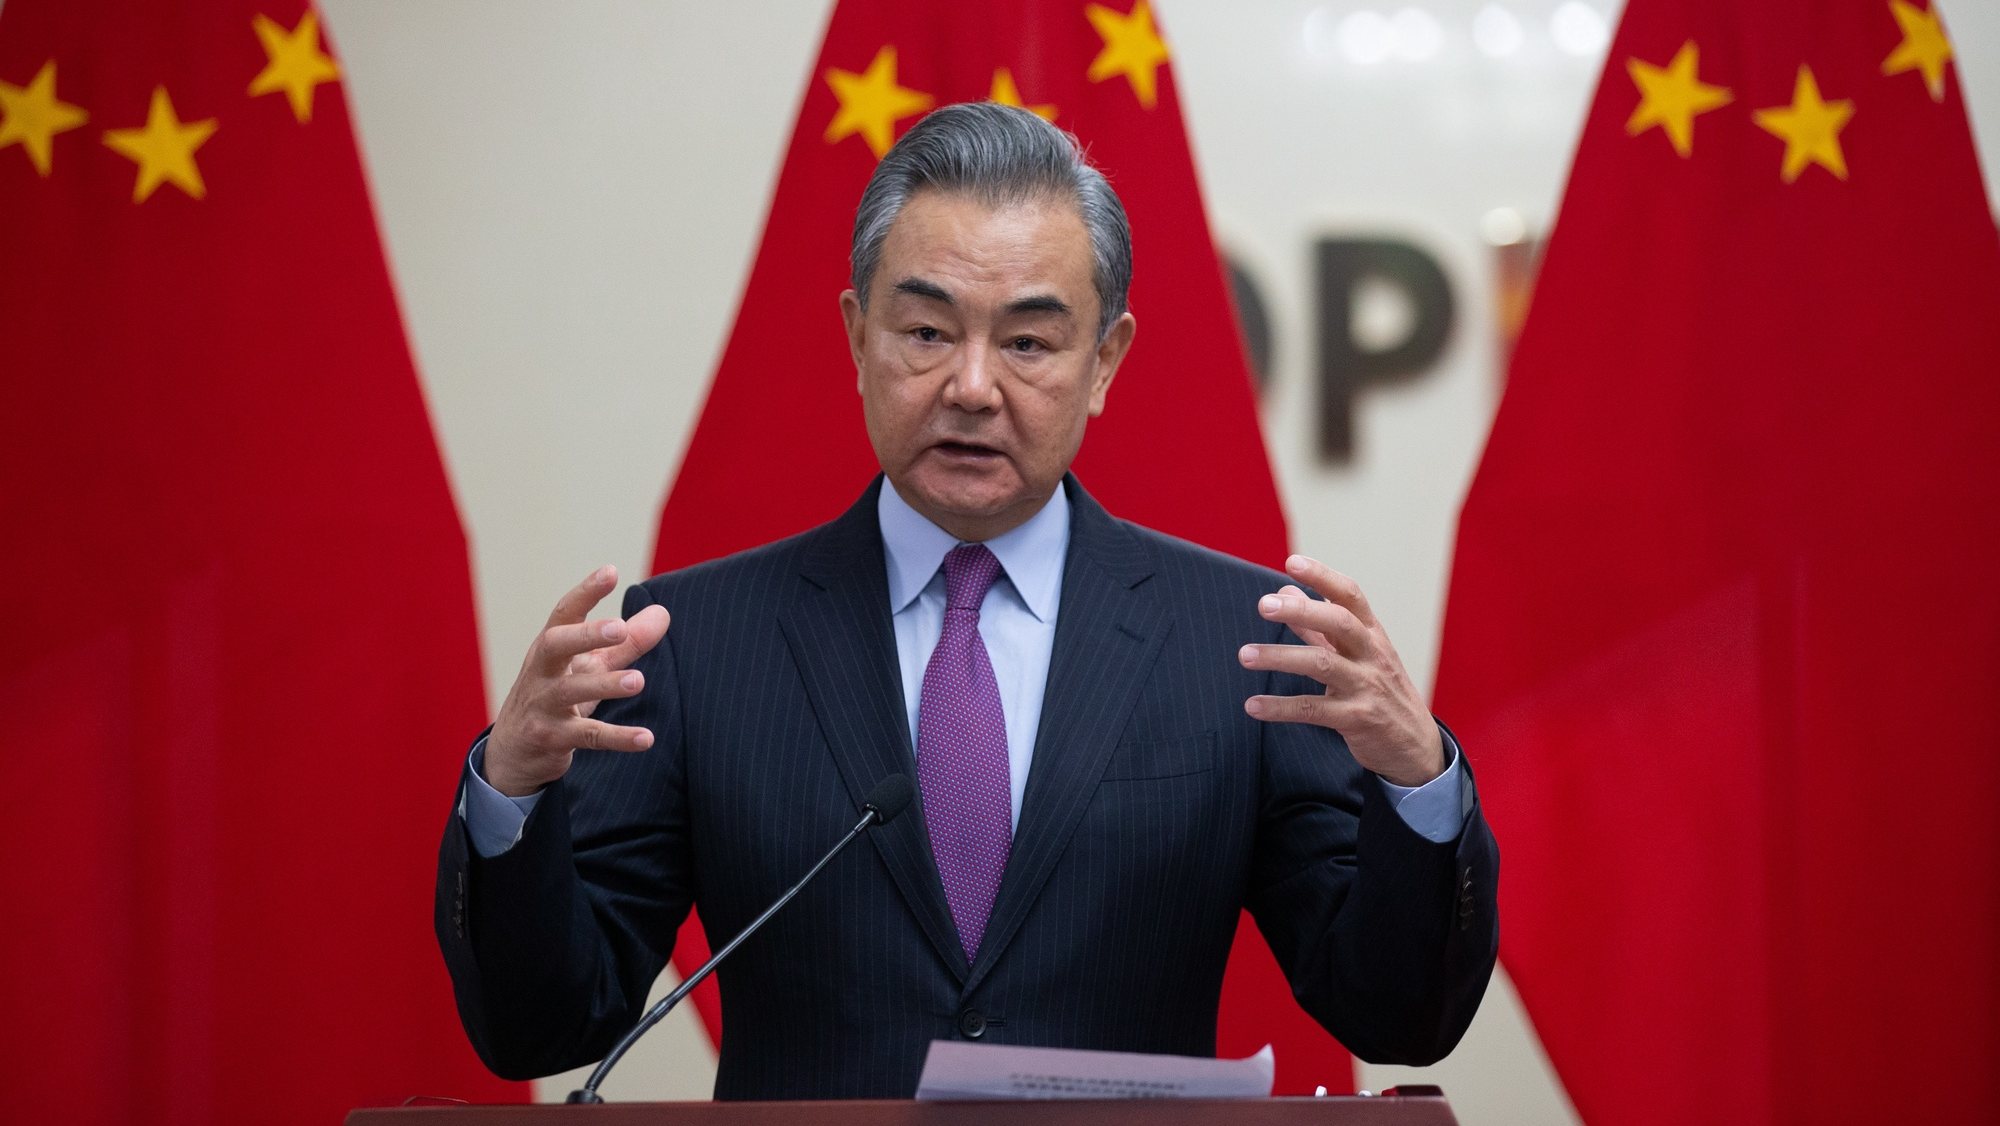 epa10111100 Chinese Foreign Minister Wang Yi speaks during a press conference after meeting with Mongolian Foreign Minister Batmunkh Battsetseg in Ulaanbaatar, Mongolia, 08 August 2022. Wang Yi is in Mongolia for a working visit on 08 August.  EPA/BYAMBASUREN BYAMBA-OCHIR